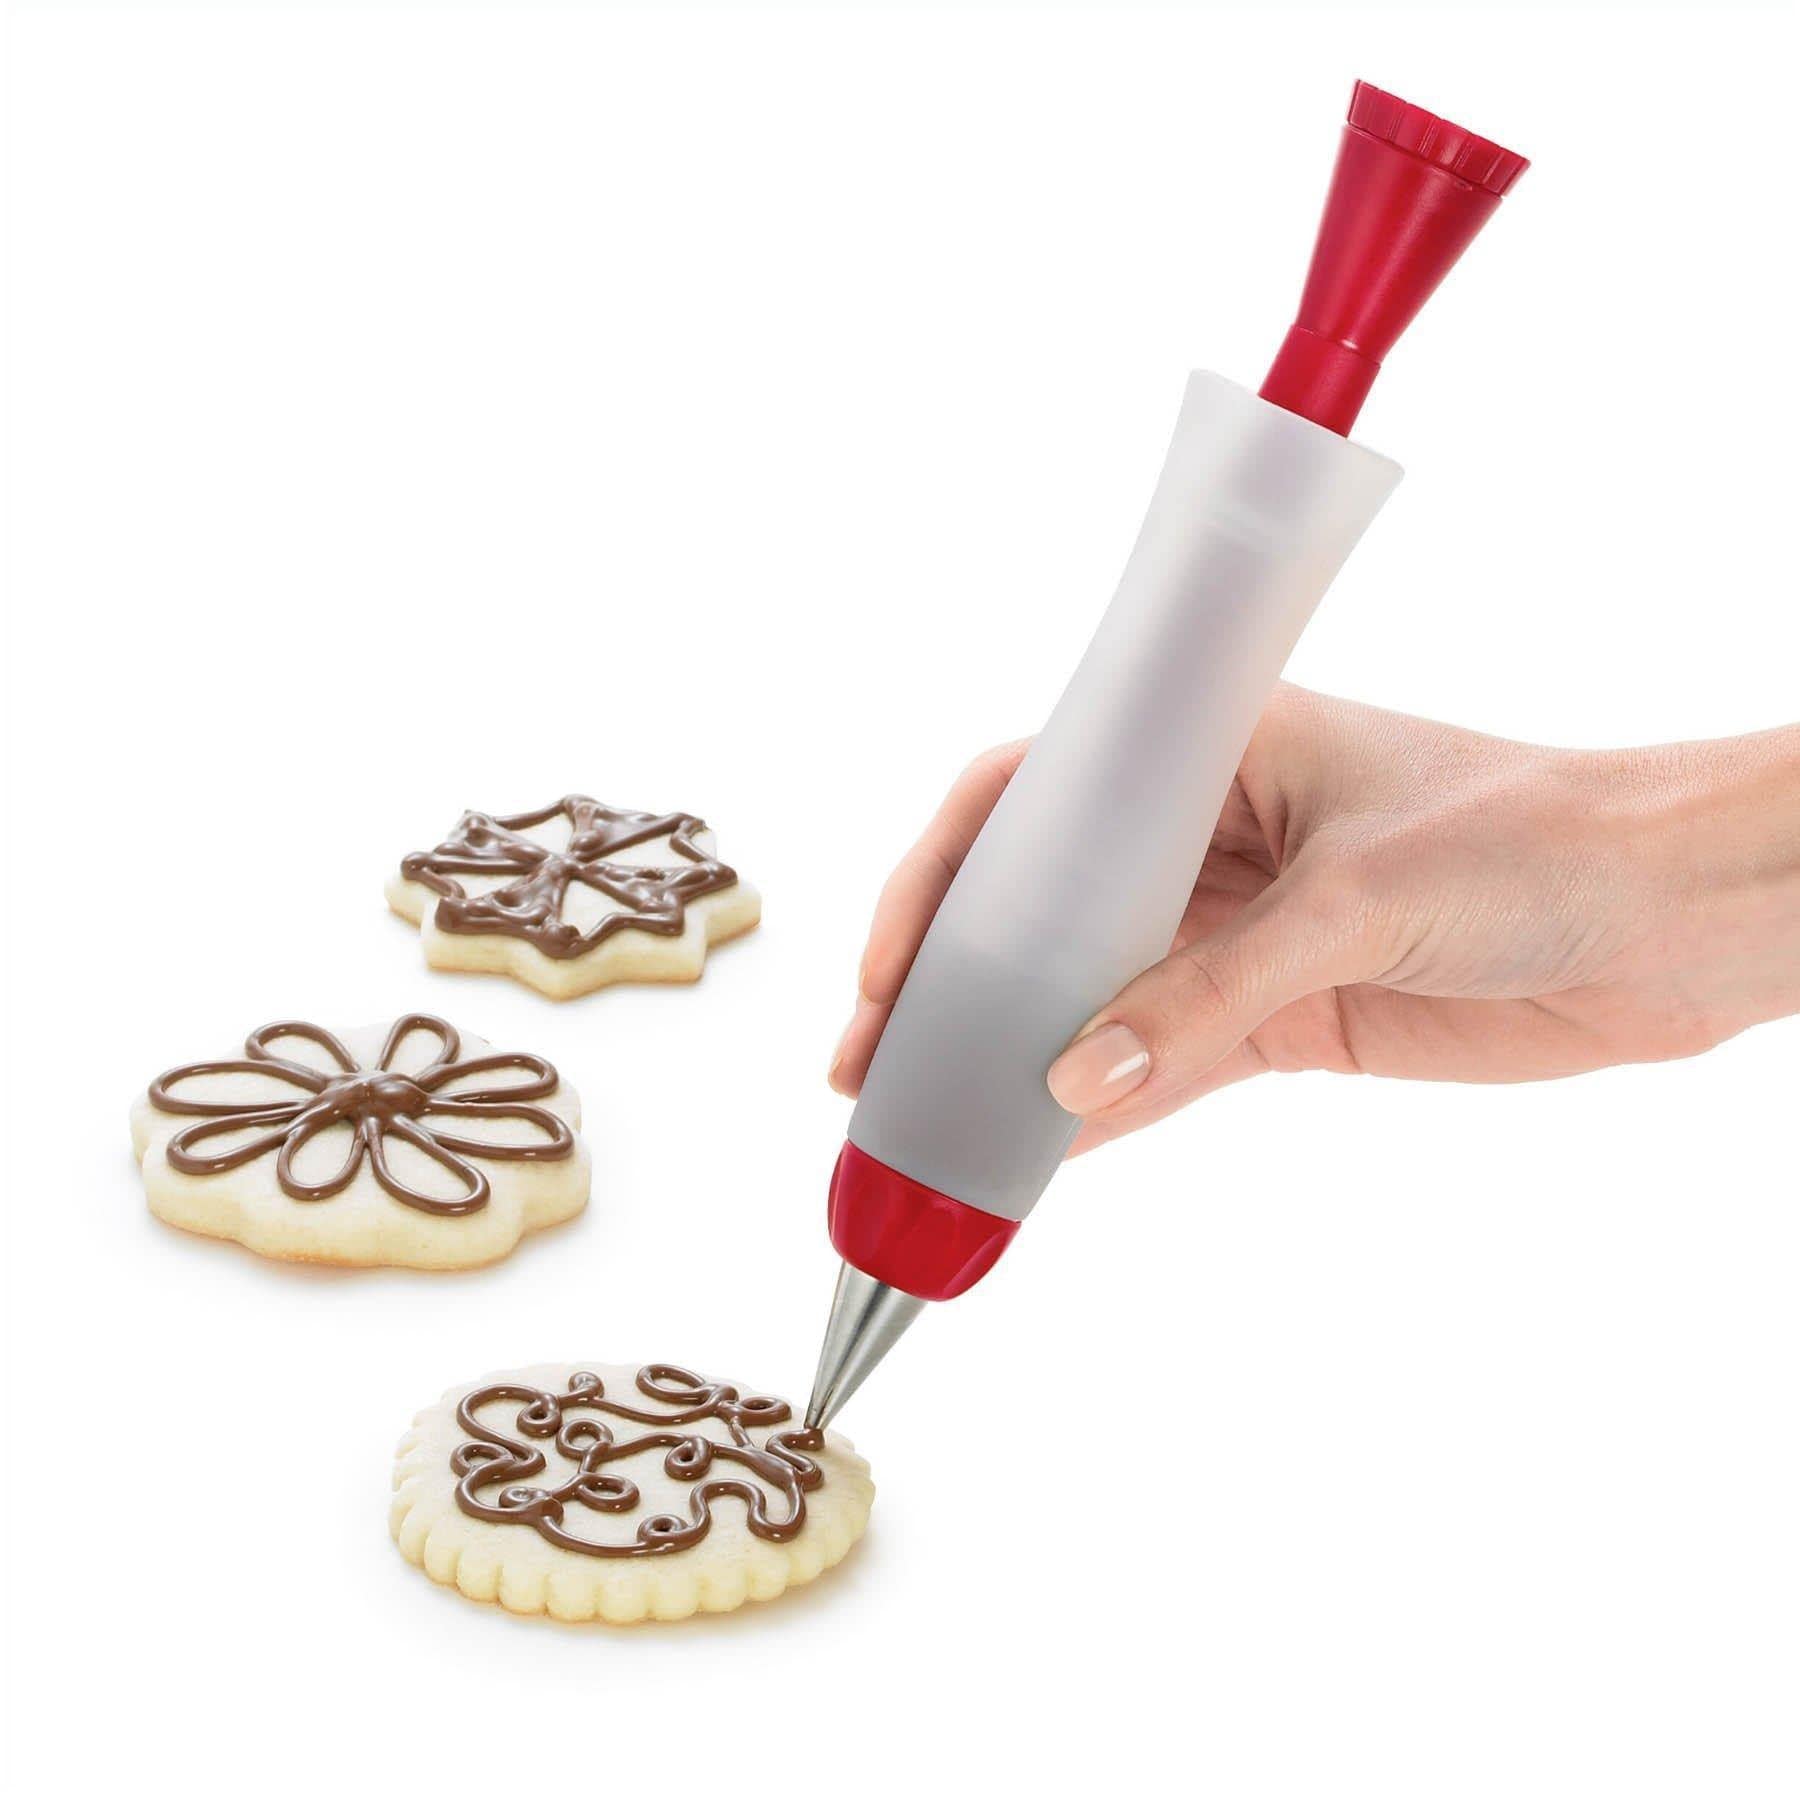 Cuisipro Deluxe Decorating Pen - Kitchenalia Westboro